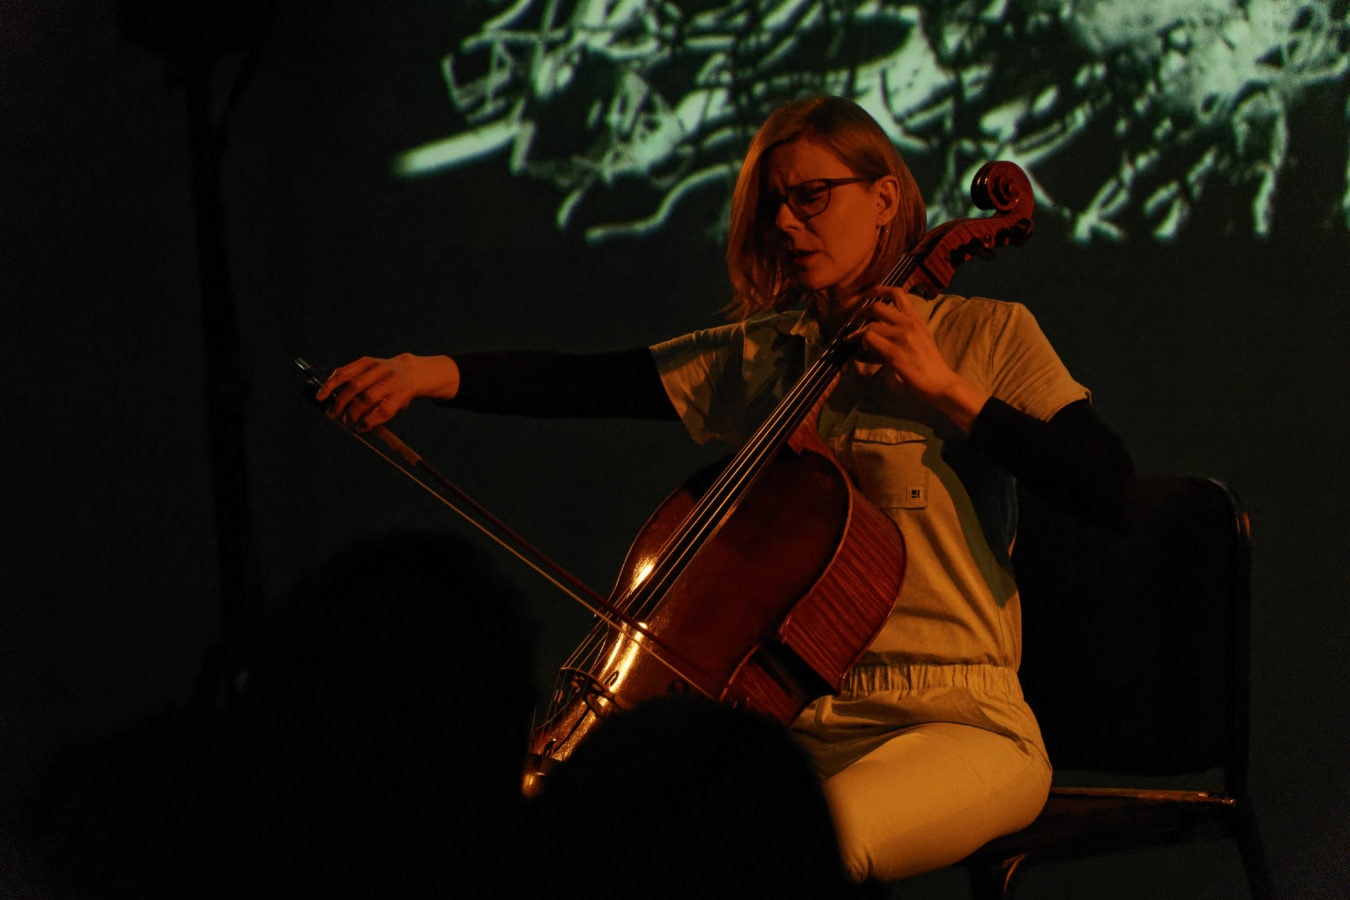 Cellist Amanda Gookin performing in the Dupont Underground as part of the Kennedy Center Direct Current Festival on March 29. Photo by Anu Dev.